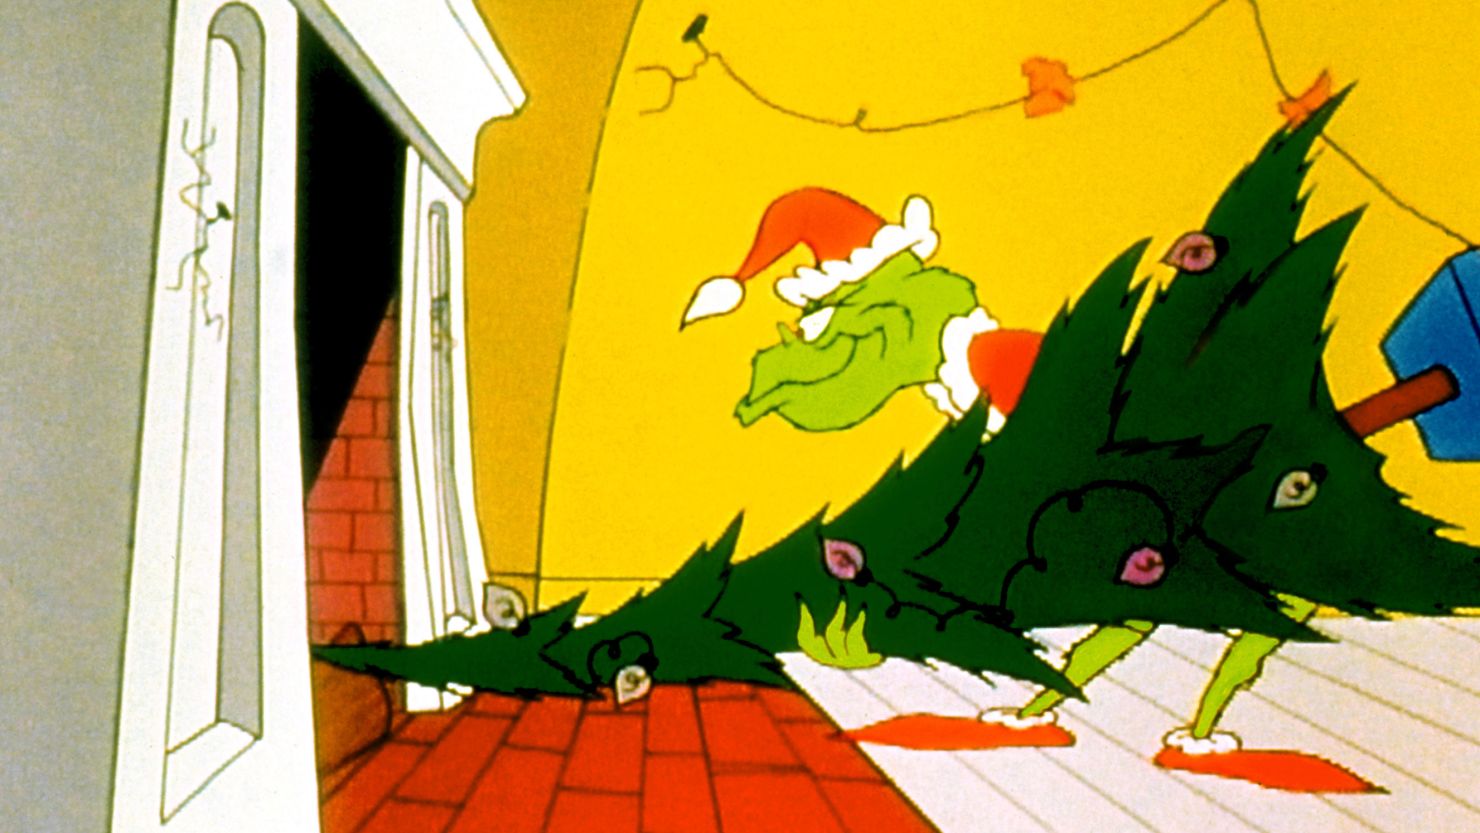 The Grinch sends a tree up the chimney during his raid on Whoville in the 1966 cartoon classic, "How the Grinch Stole Christmas."